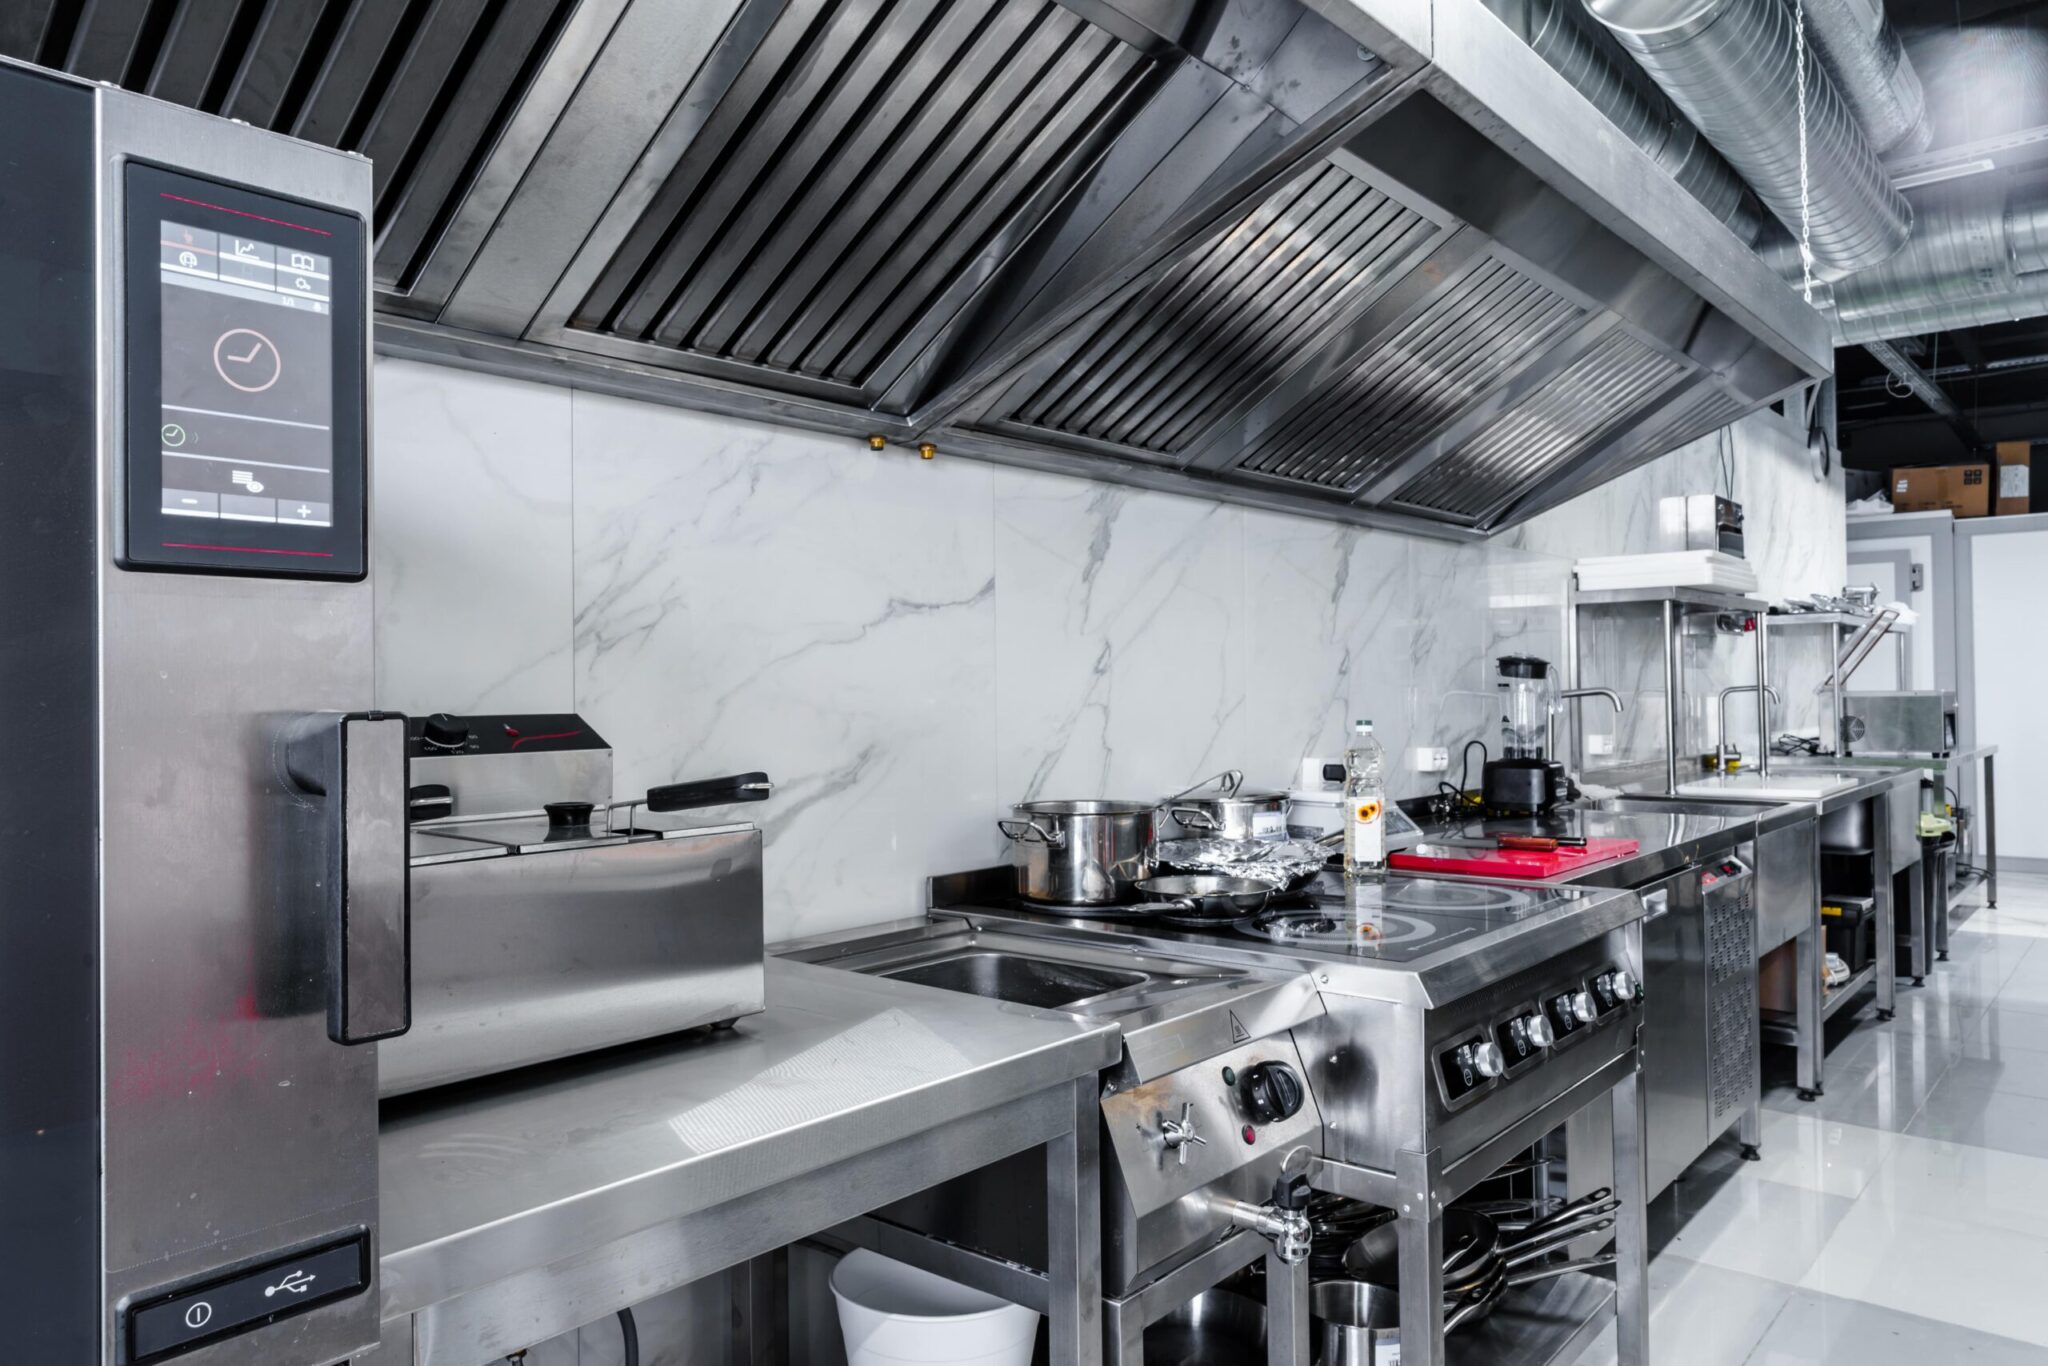 https://www.lotuscommercial.com.au/wp-content/uploads/2022/04/kitchen-appliances-in-professional-kitchen-scaled.jpg